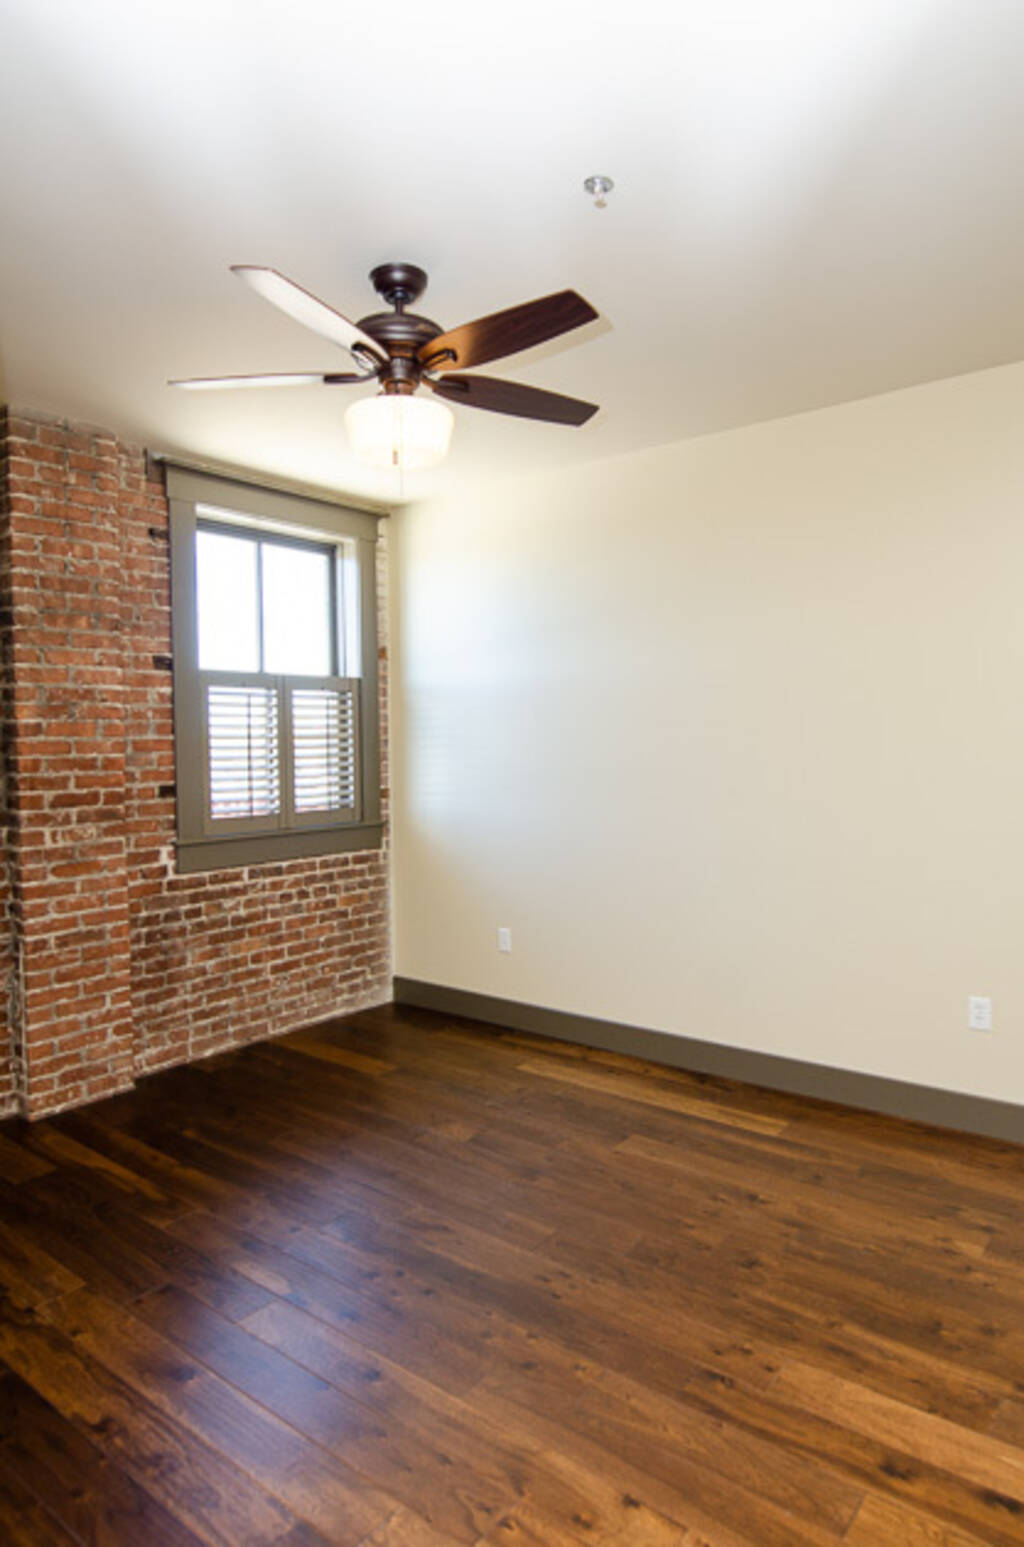 LOFT 3C BEDROOM CEILING FAN AND BRICK WALL WITH WINDOW